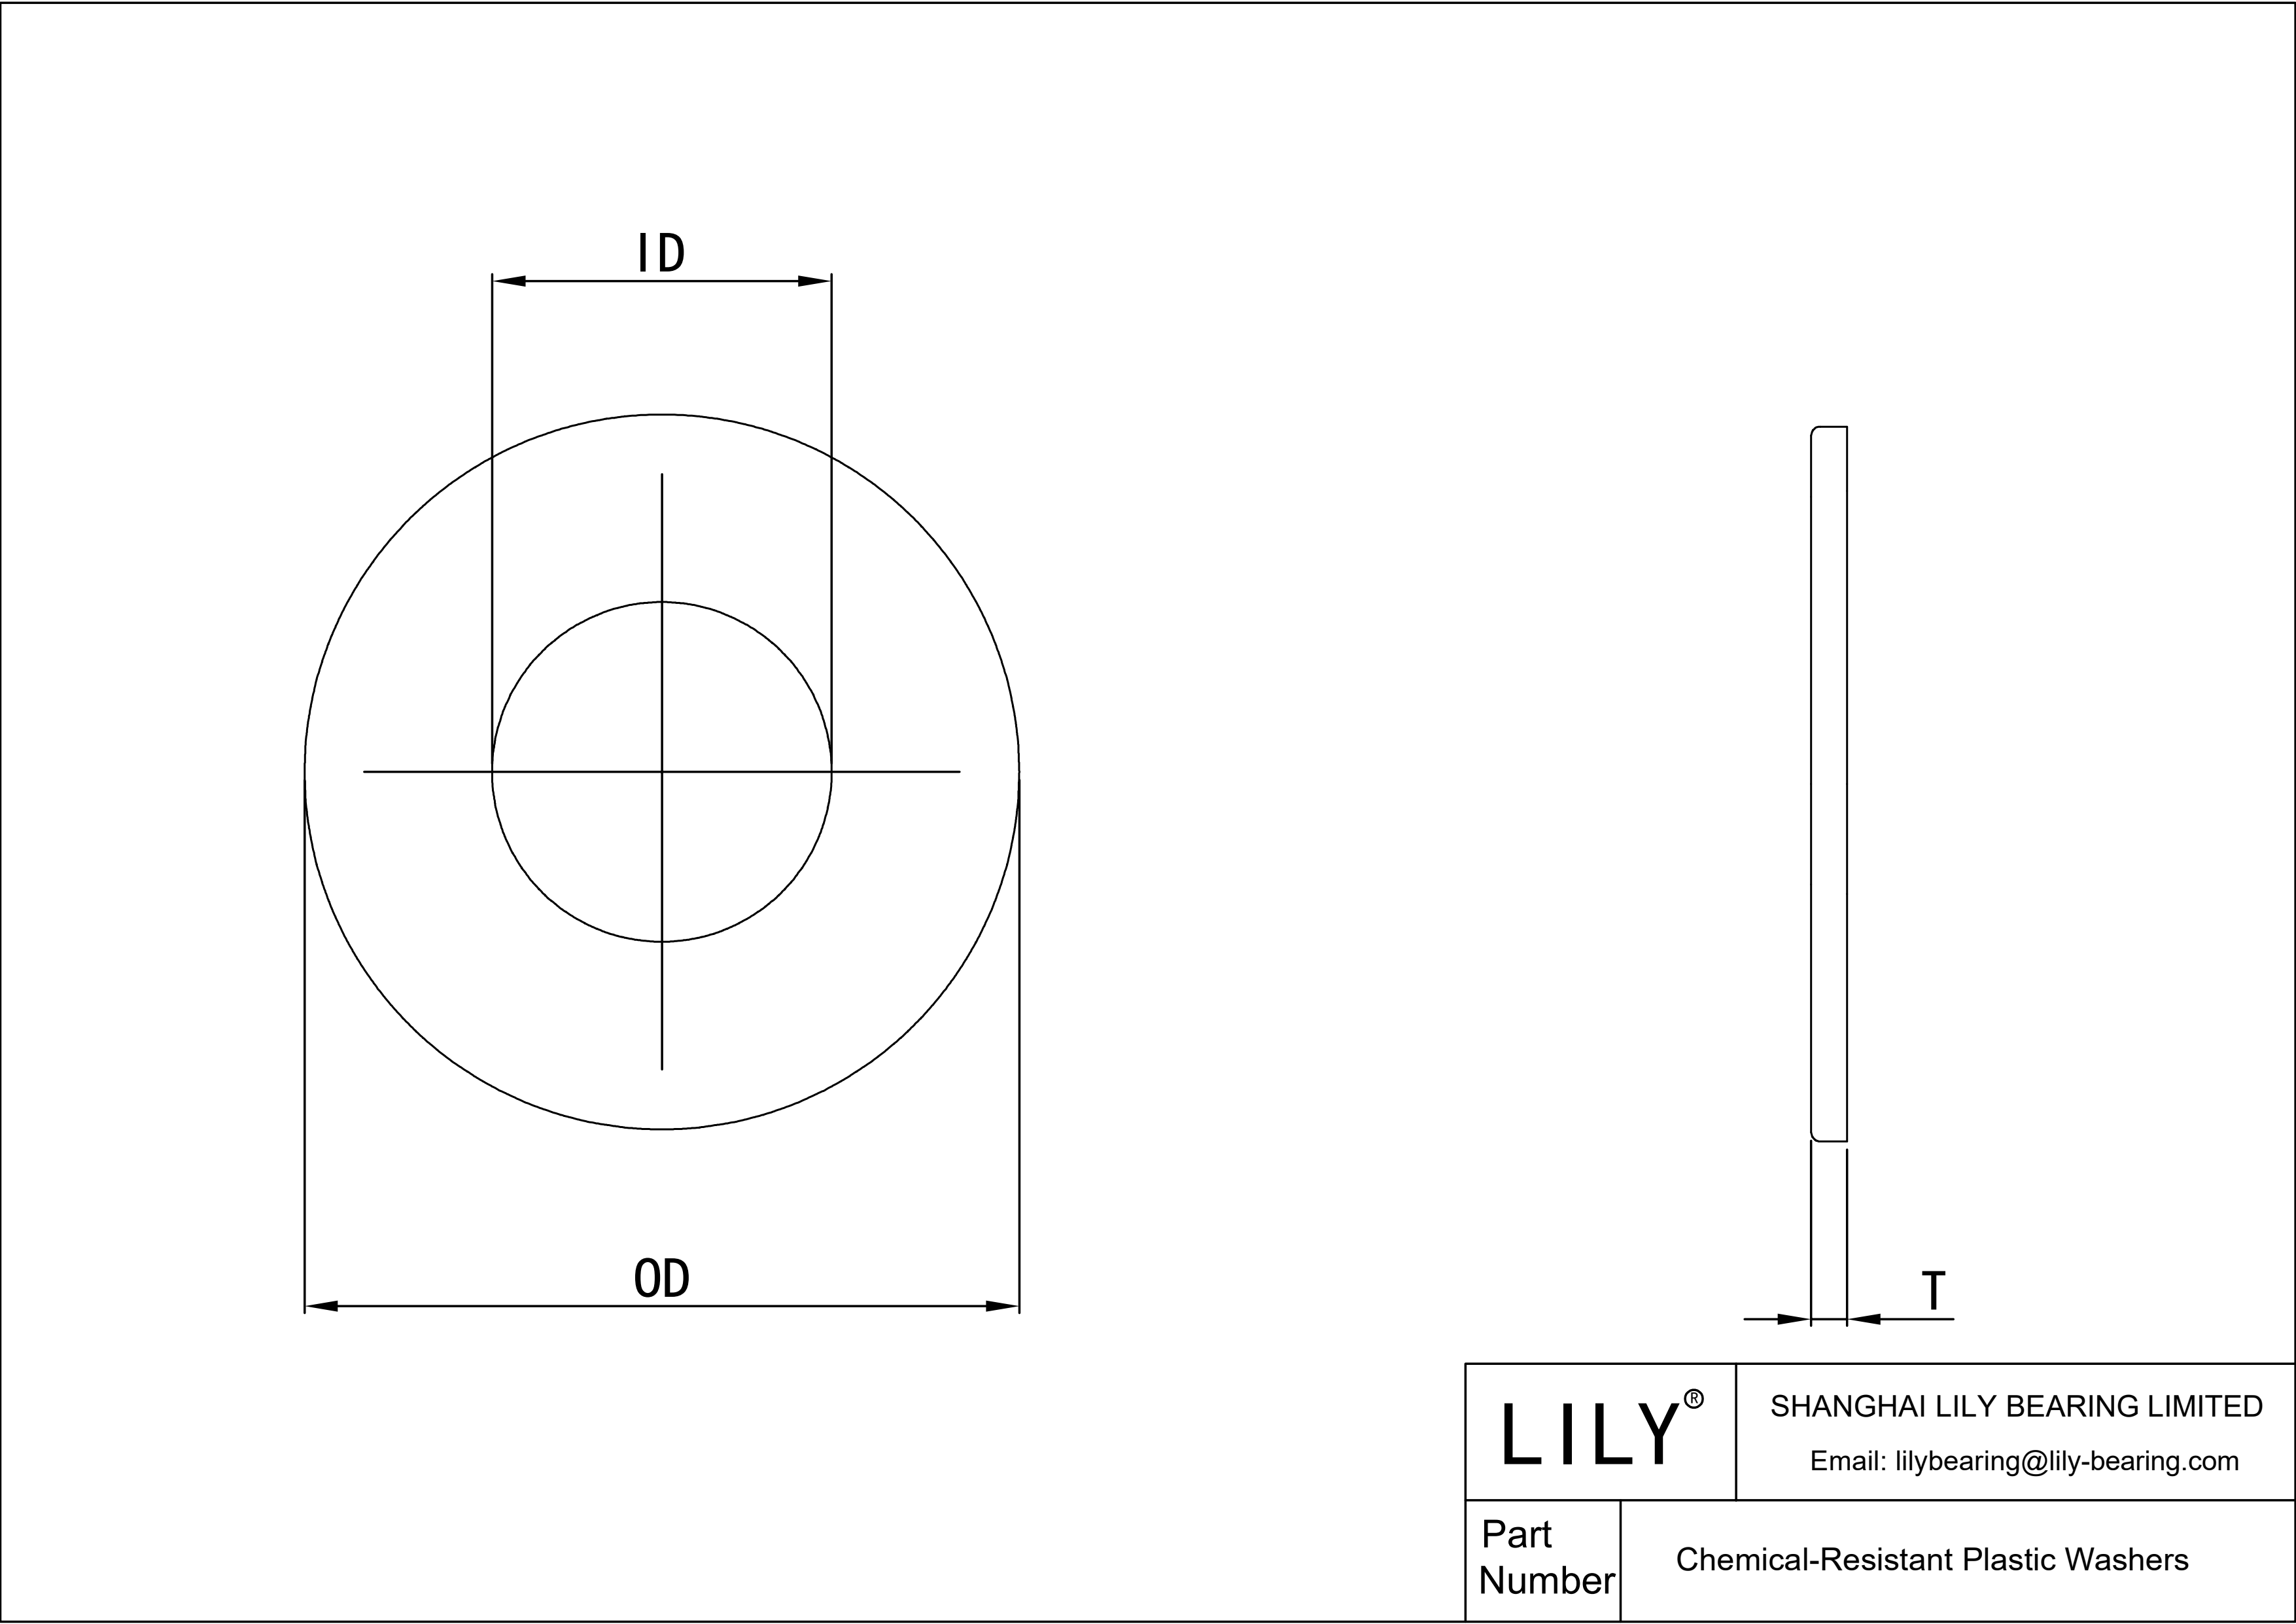 JFGDAABCE Chemical-Resistant Plastic Washers cad drawing